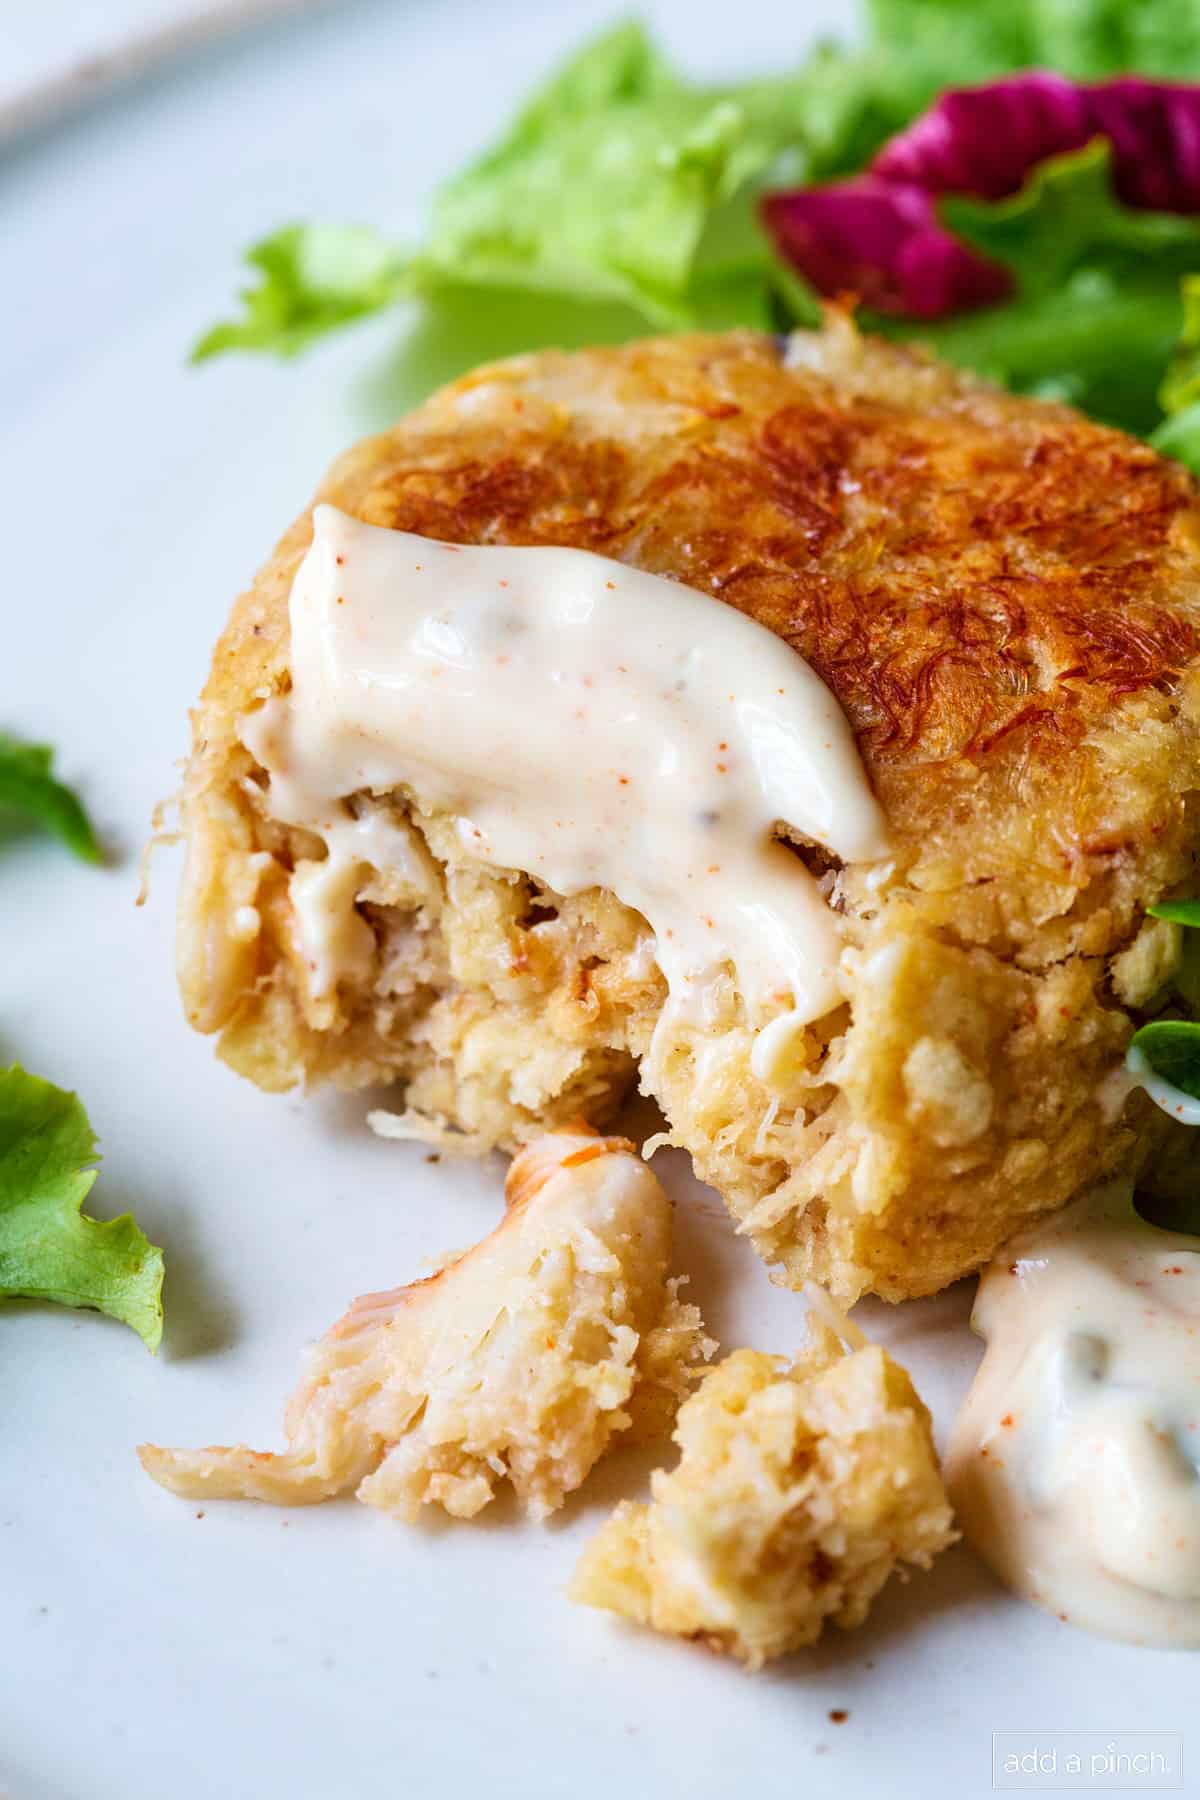 Lump crab meat shows in a bite of a crab cake served with a salad and a drizzle of sauce.